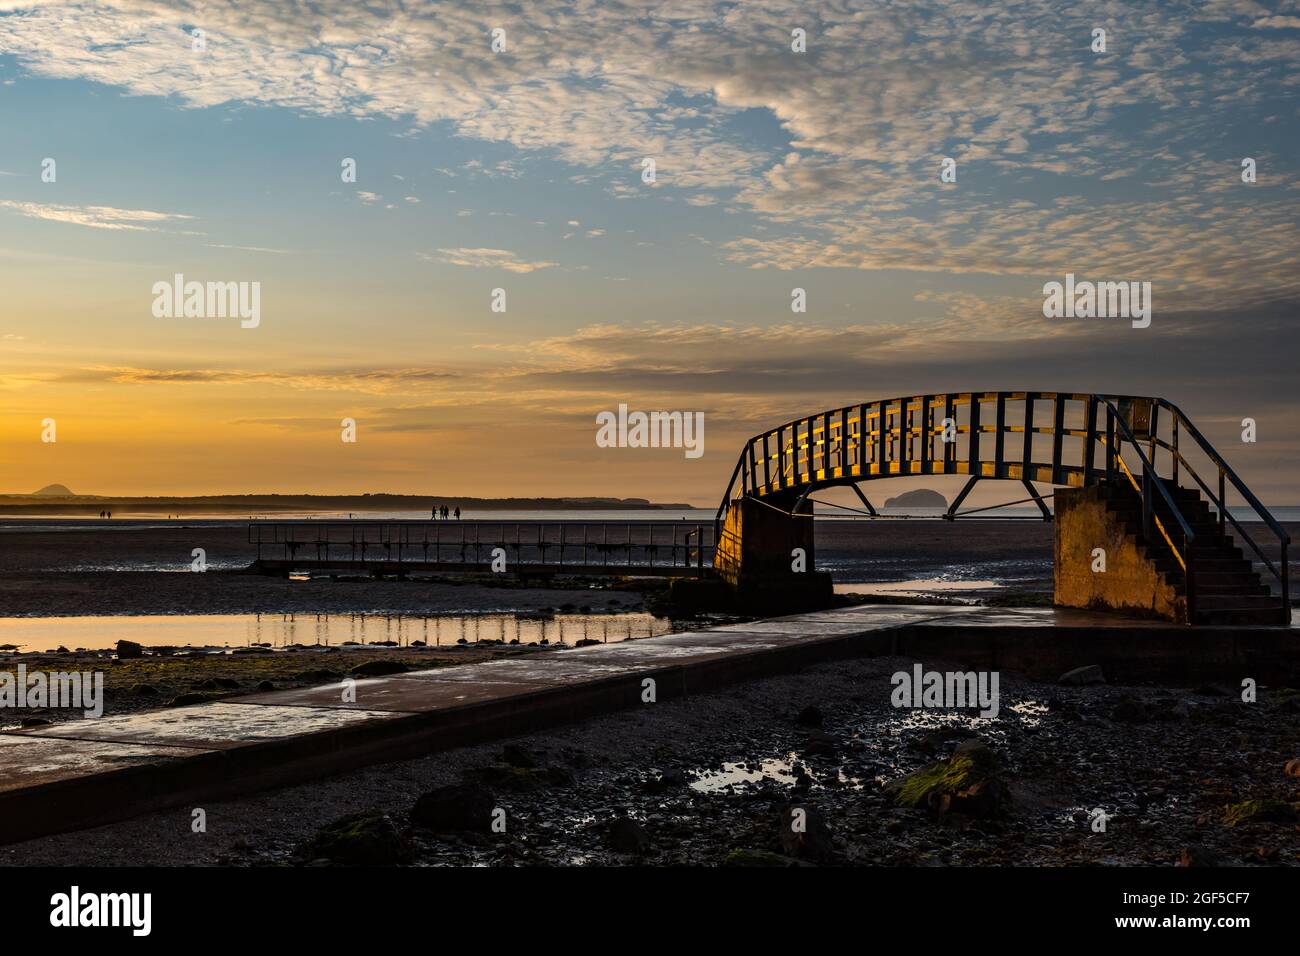 Dunbar, East Lothian, Scotland, United Kingdom, 23rd August 2021. UK Weather: sunset at Belhaven Bay. A warm evening with a colourful sky as the sun sets at low tide with the so-called 'Bridge to Nowhere' footbridge Stock Photo